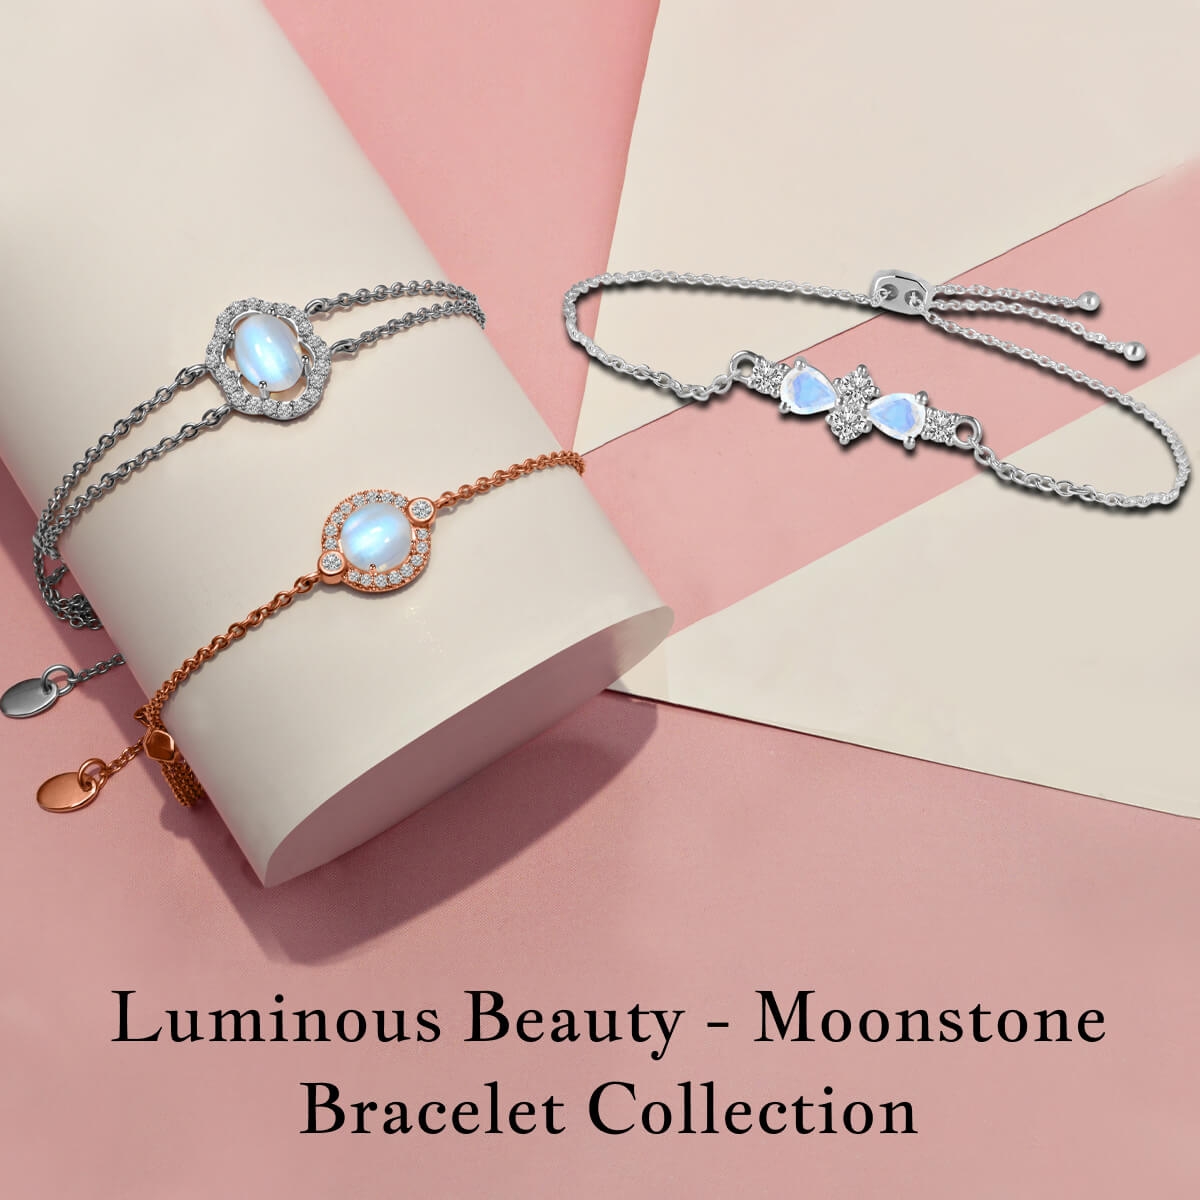 Attain Inner Peace with A Moonstone Bracelet